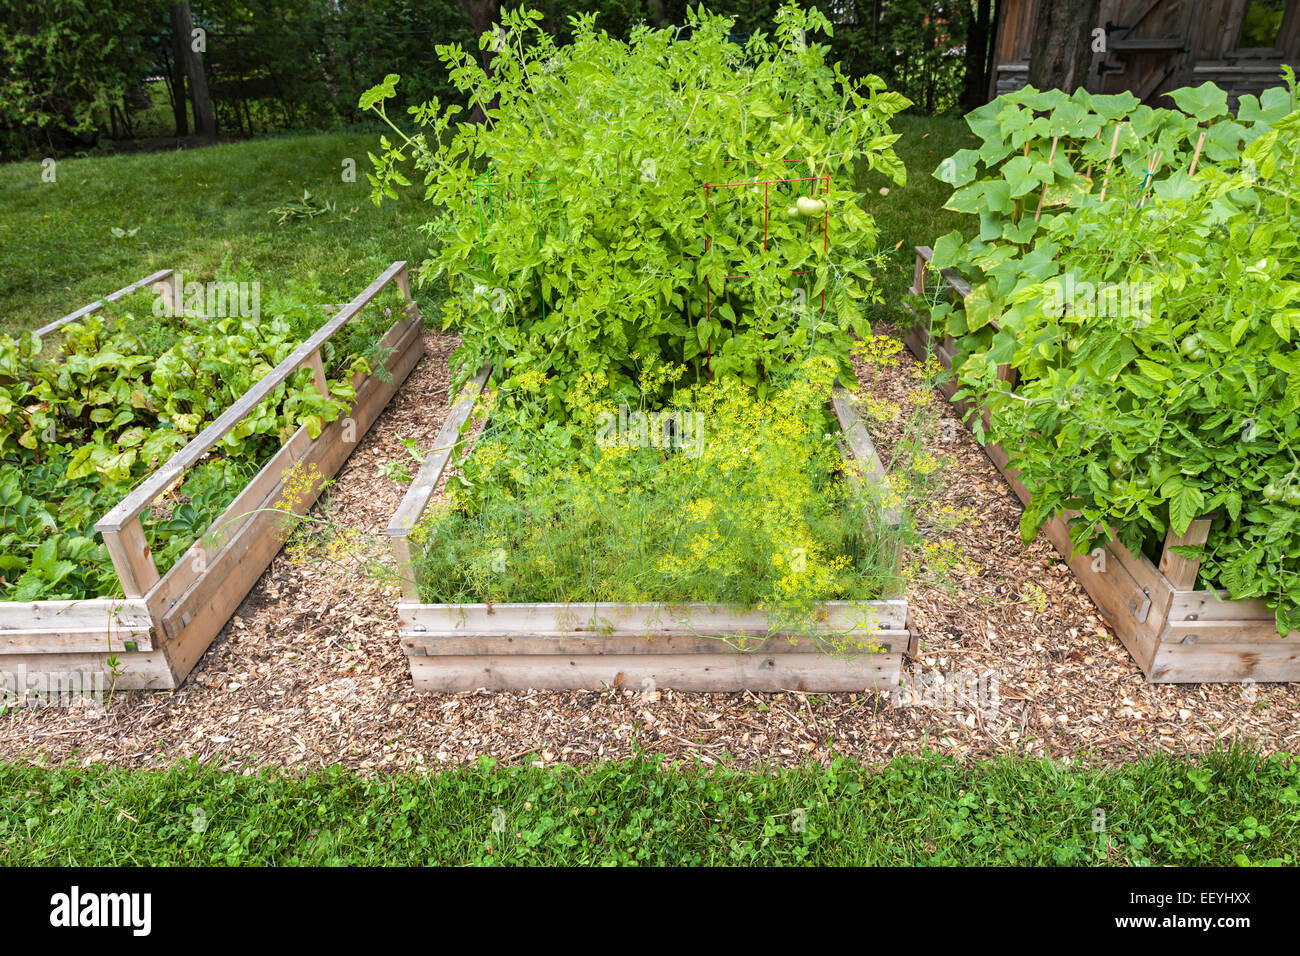 Three raised garden beds growing fresh vegetables in a backyard Stock Photo